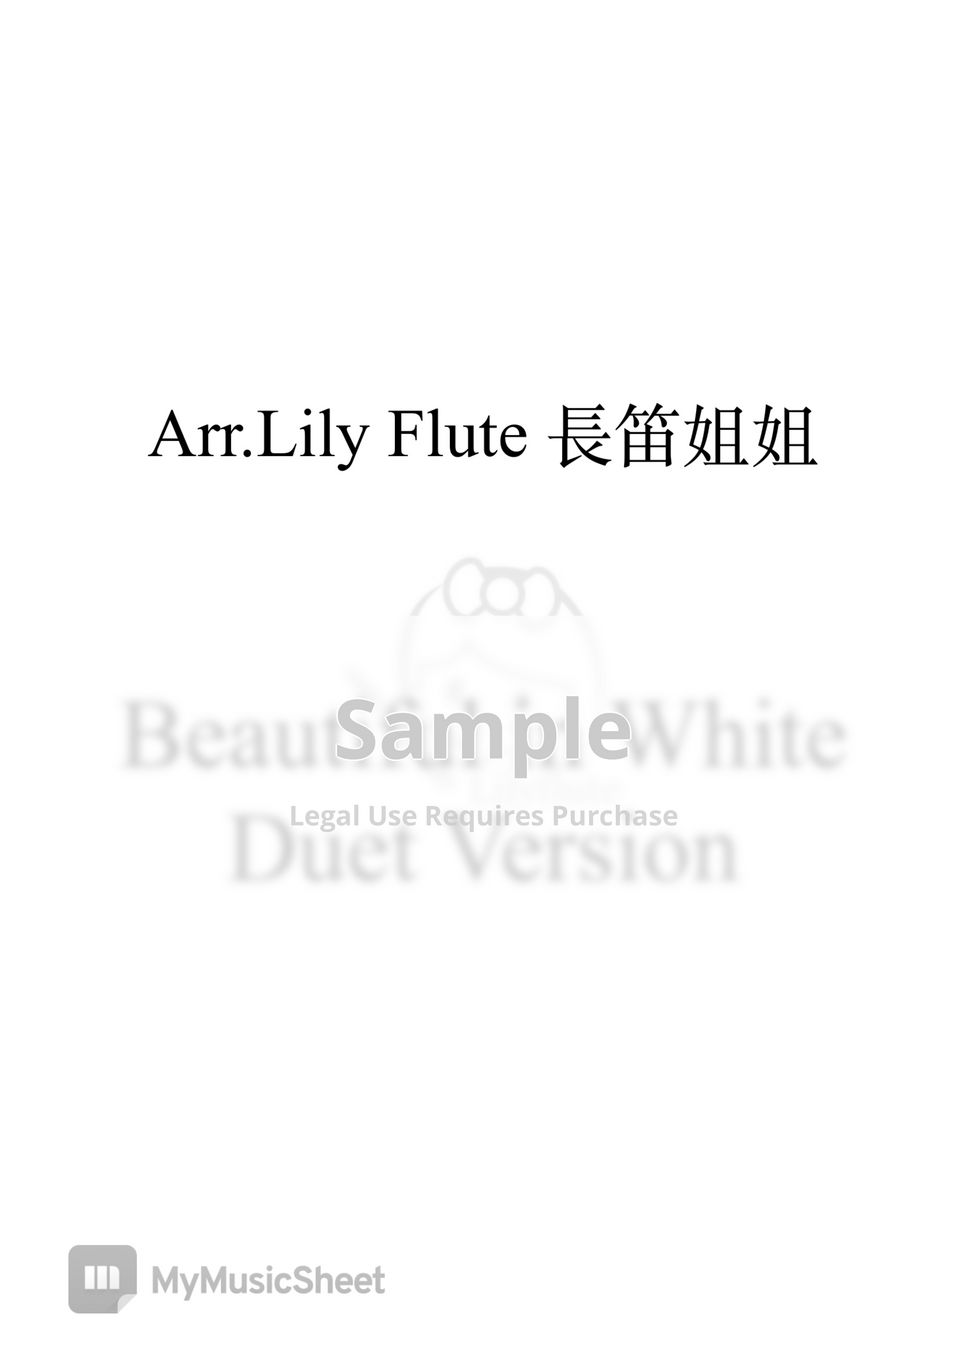 Westlife - Beautiful In White ＆ Canon Duet version (YT附伴奏) by Lily Flute 長笛姐姐